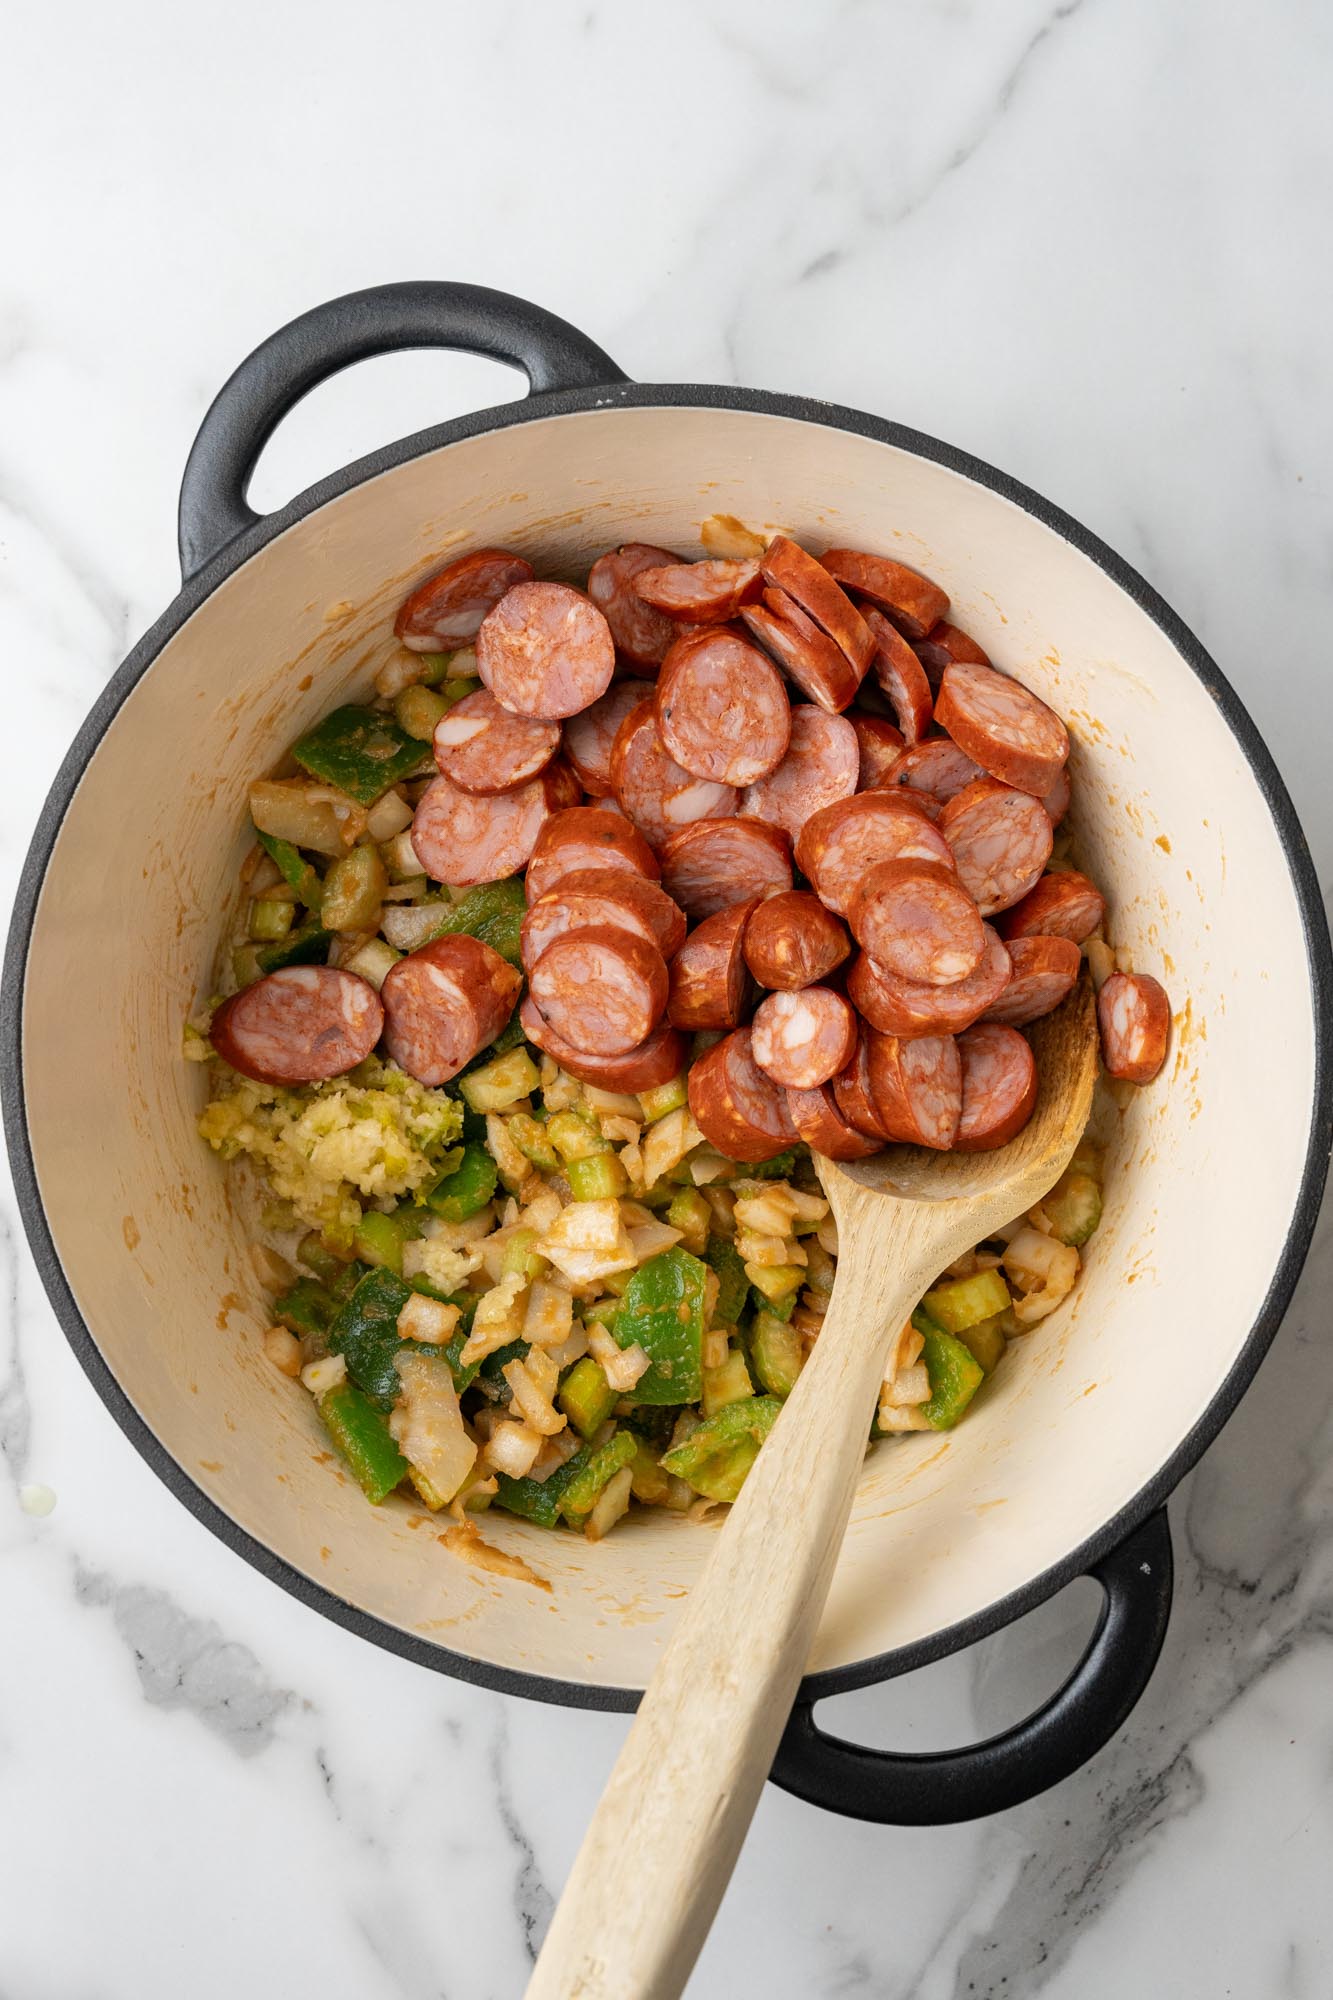 sliced andouille sausage added to a pan of onions and peppers cooked in roux.